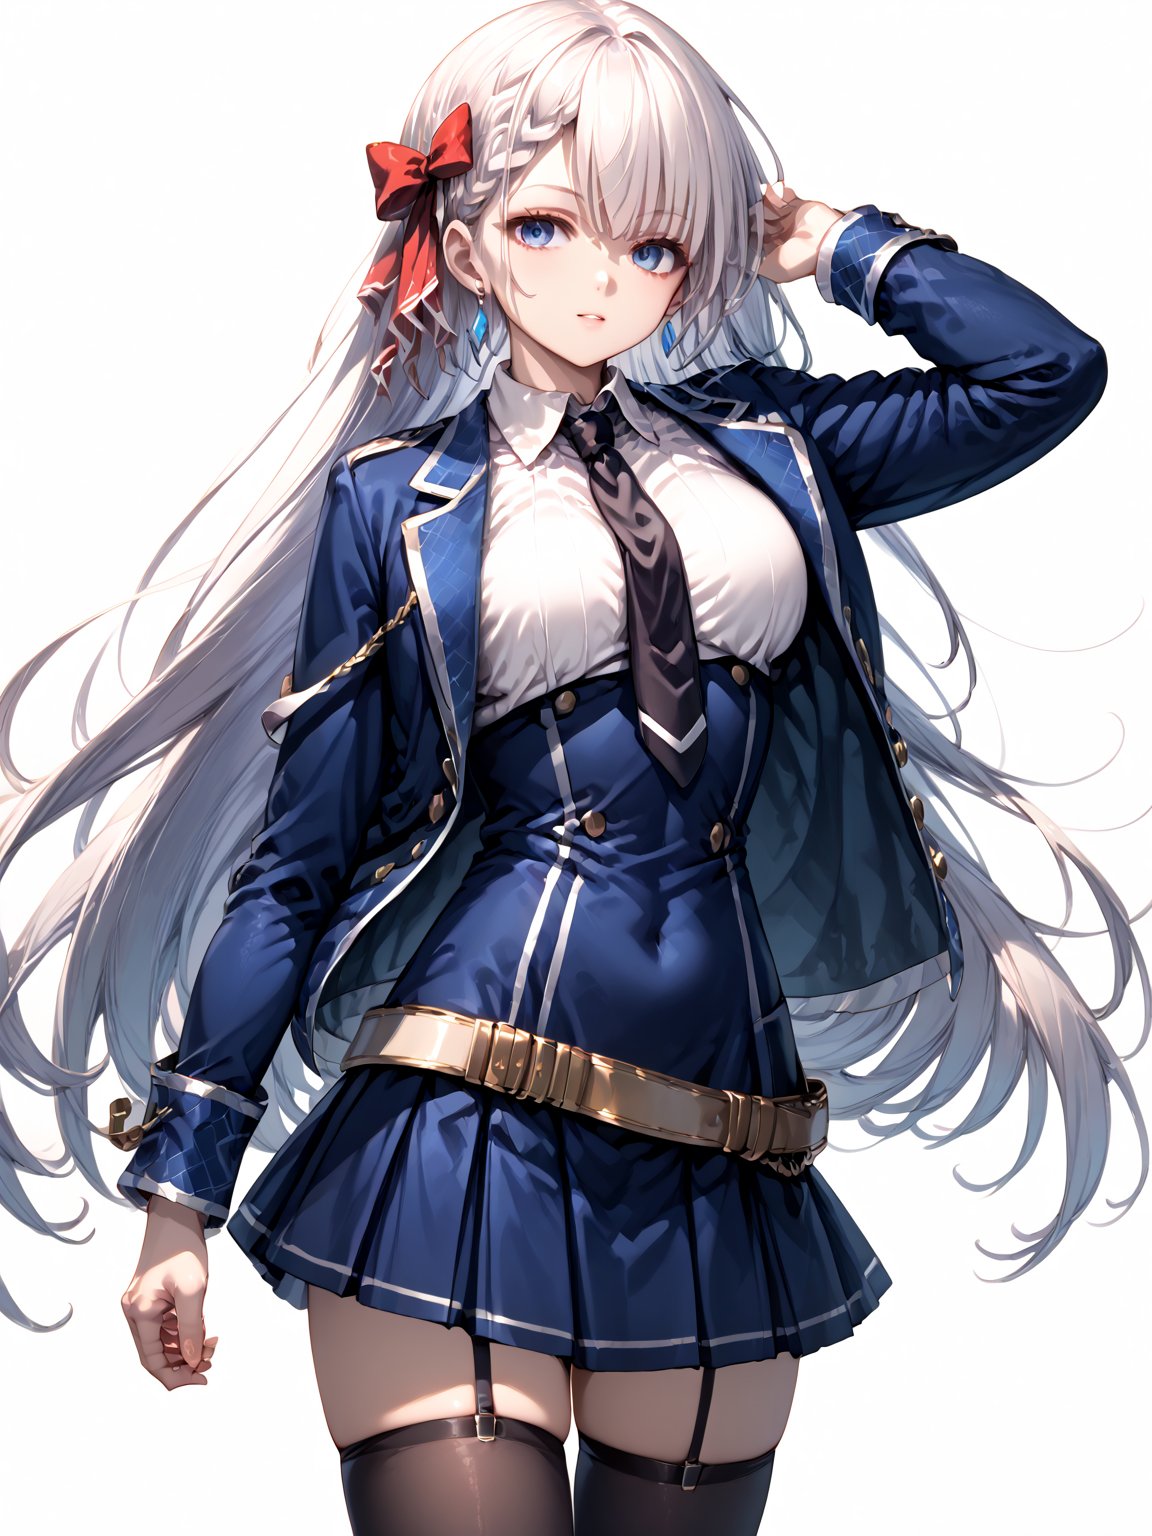 score_9,score_8_up,score_7_up,score_6_up, masterpiece, best quality
,//Character, 
1girl, solo,RiseliaRayCrystalia, very long hair, white hair, braid, blue eyes, medium breasts
,//Fashion, 
earrings, hair bow, long sleeves, white shirt, collared shirt, black necktie, blue jacket, blue skirt, pleated skirt, black thighhighs, belt
,//Background, white_background
,//Others,
v, :)